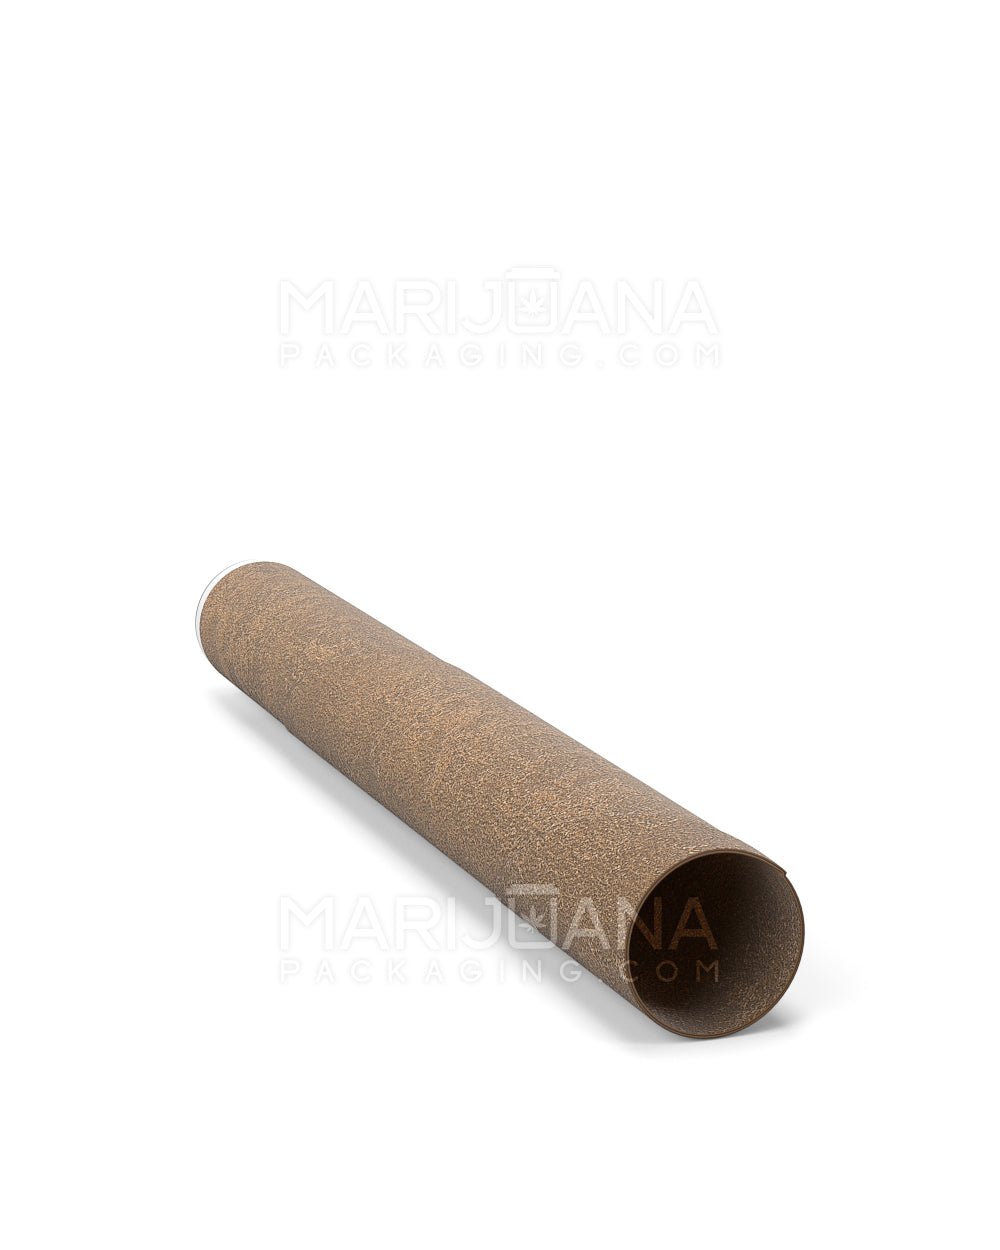 King Size Glass Tipped Wrapped Pre-Rolled Blunt Cones | 109mm - Brown Paper - 80 Count - 7